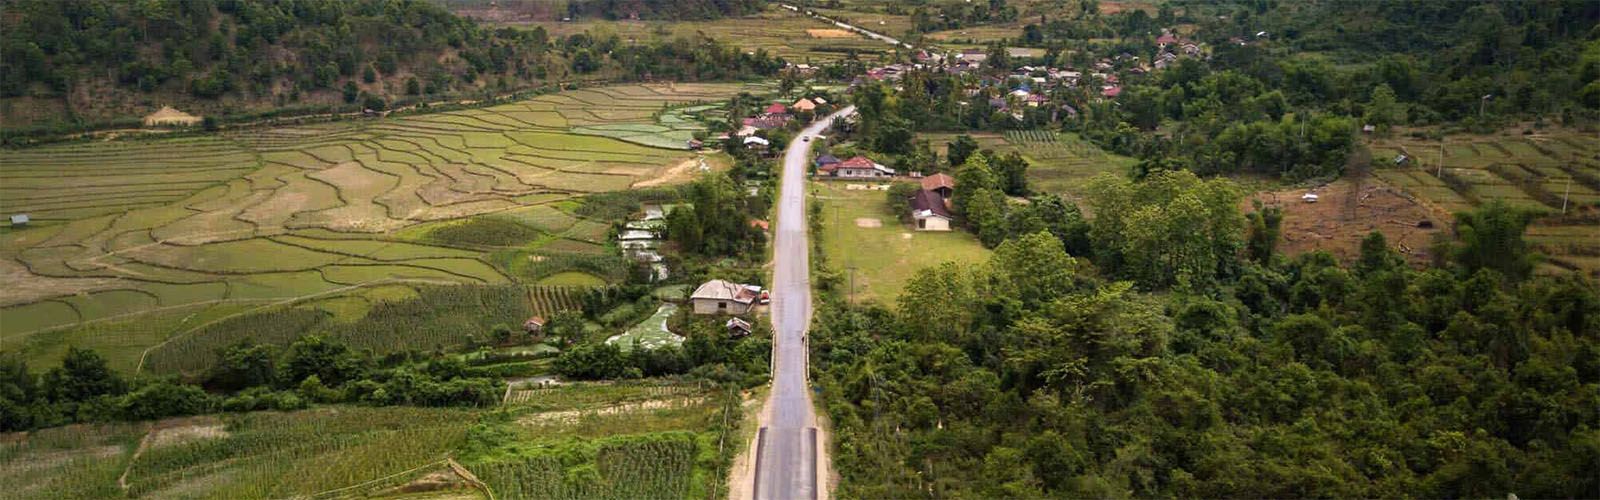 Travel Overland From North To South Of Laos | Blogs | Asianventure Tours